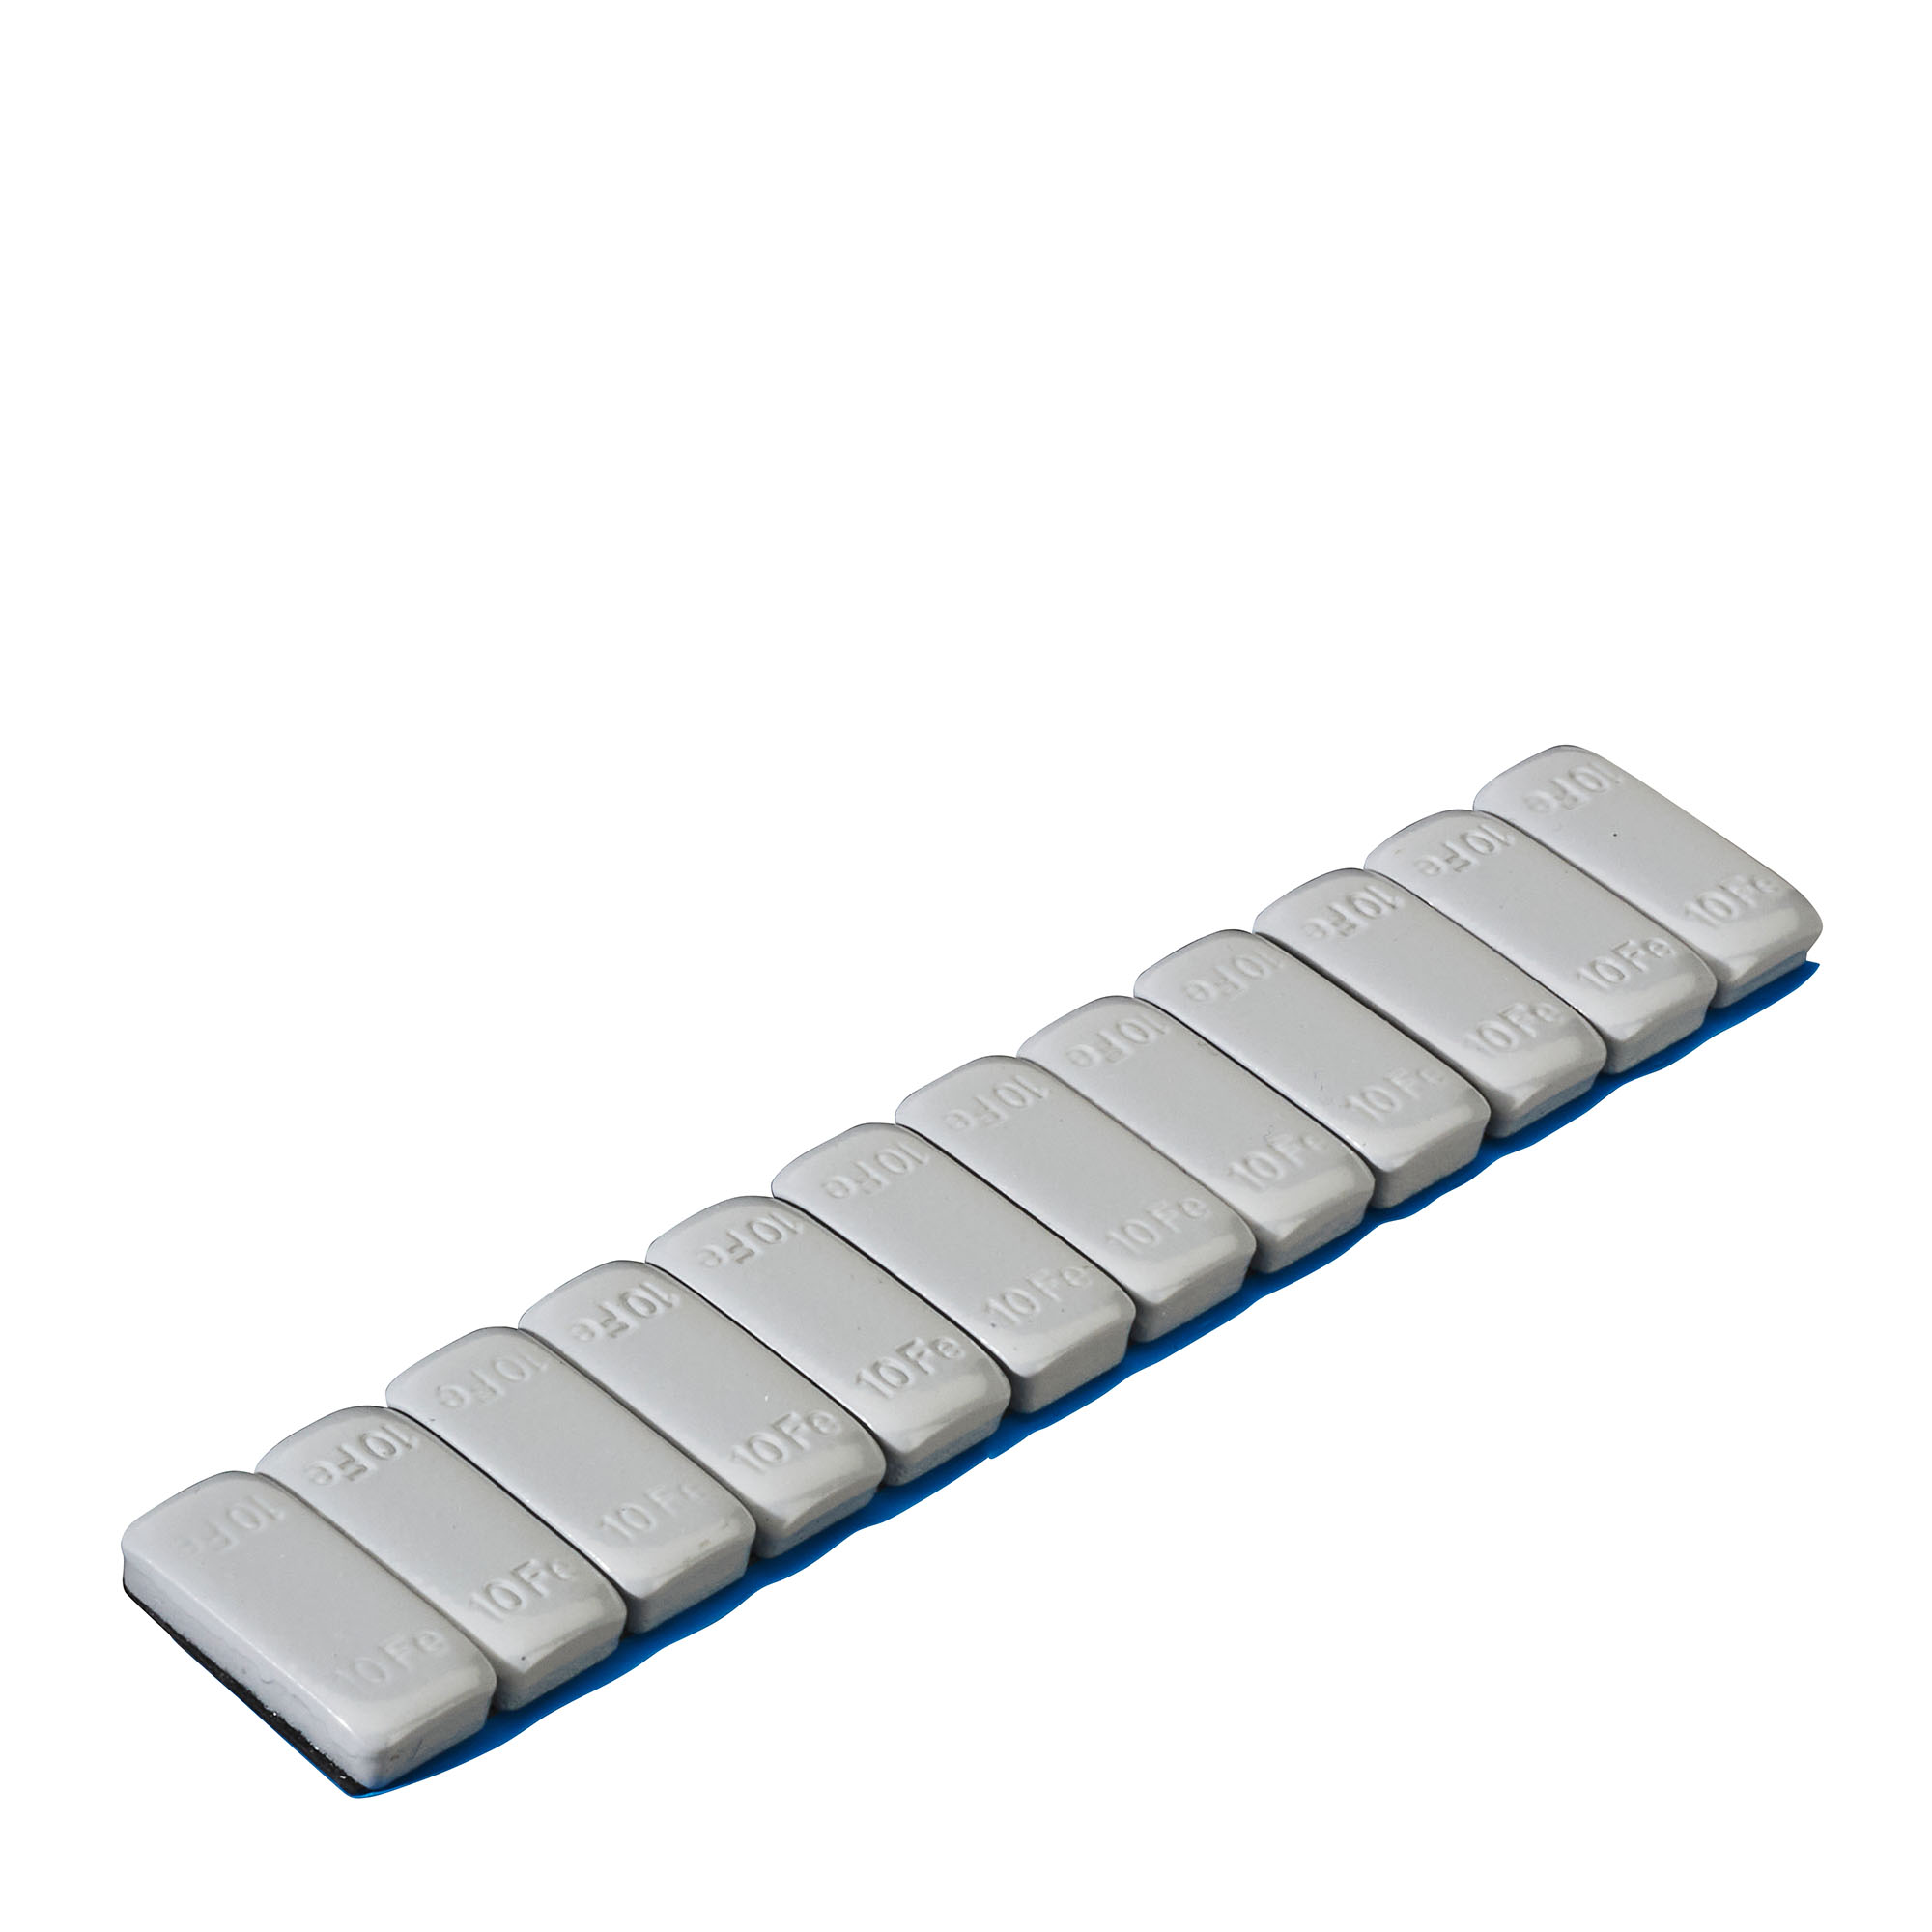 Adhesive weight - type 548, 120 g, steel, silver